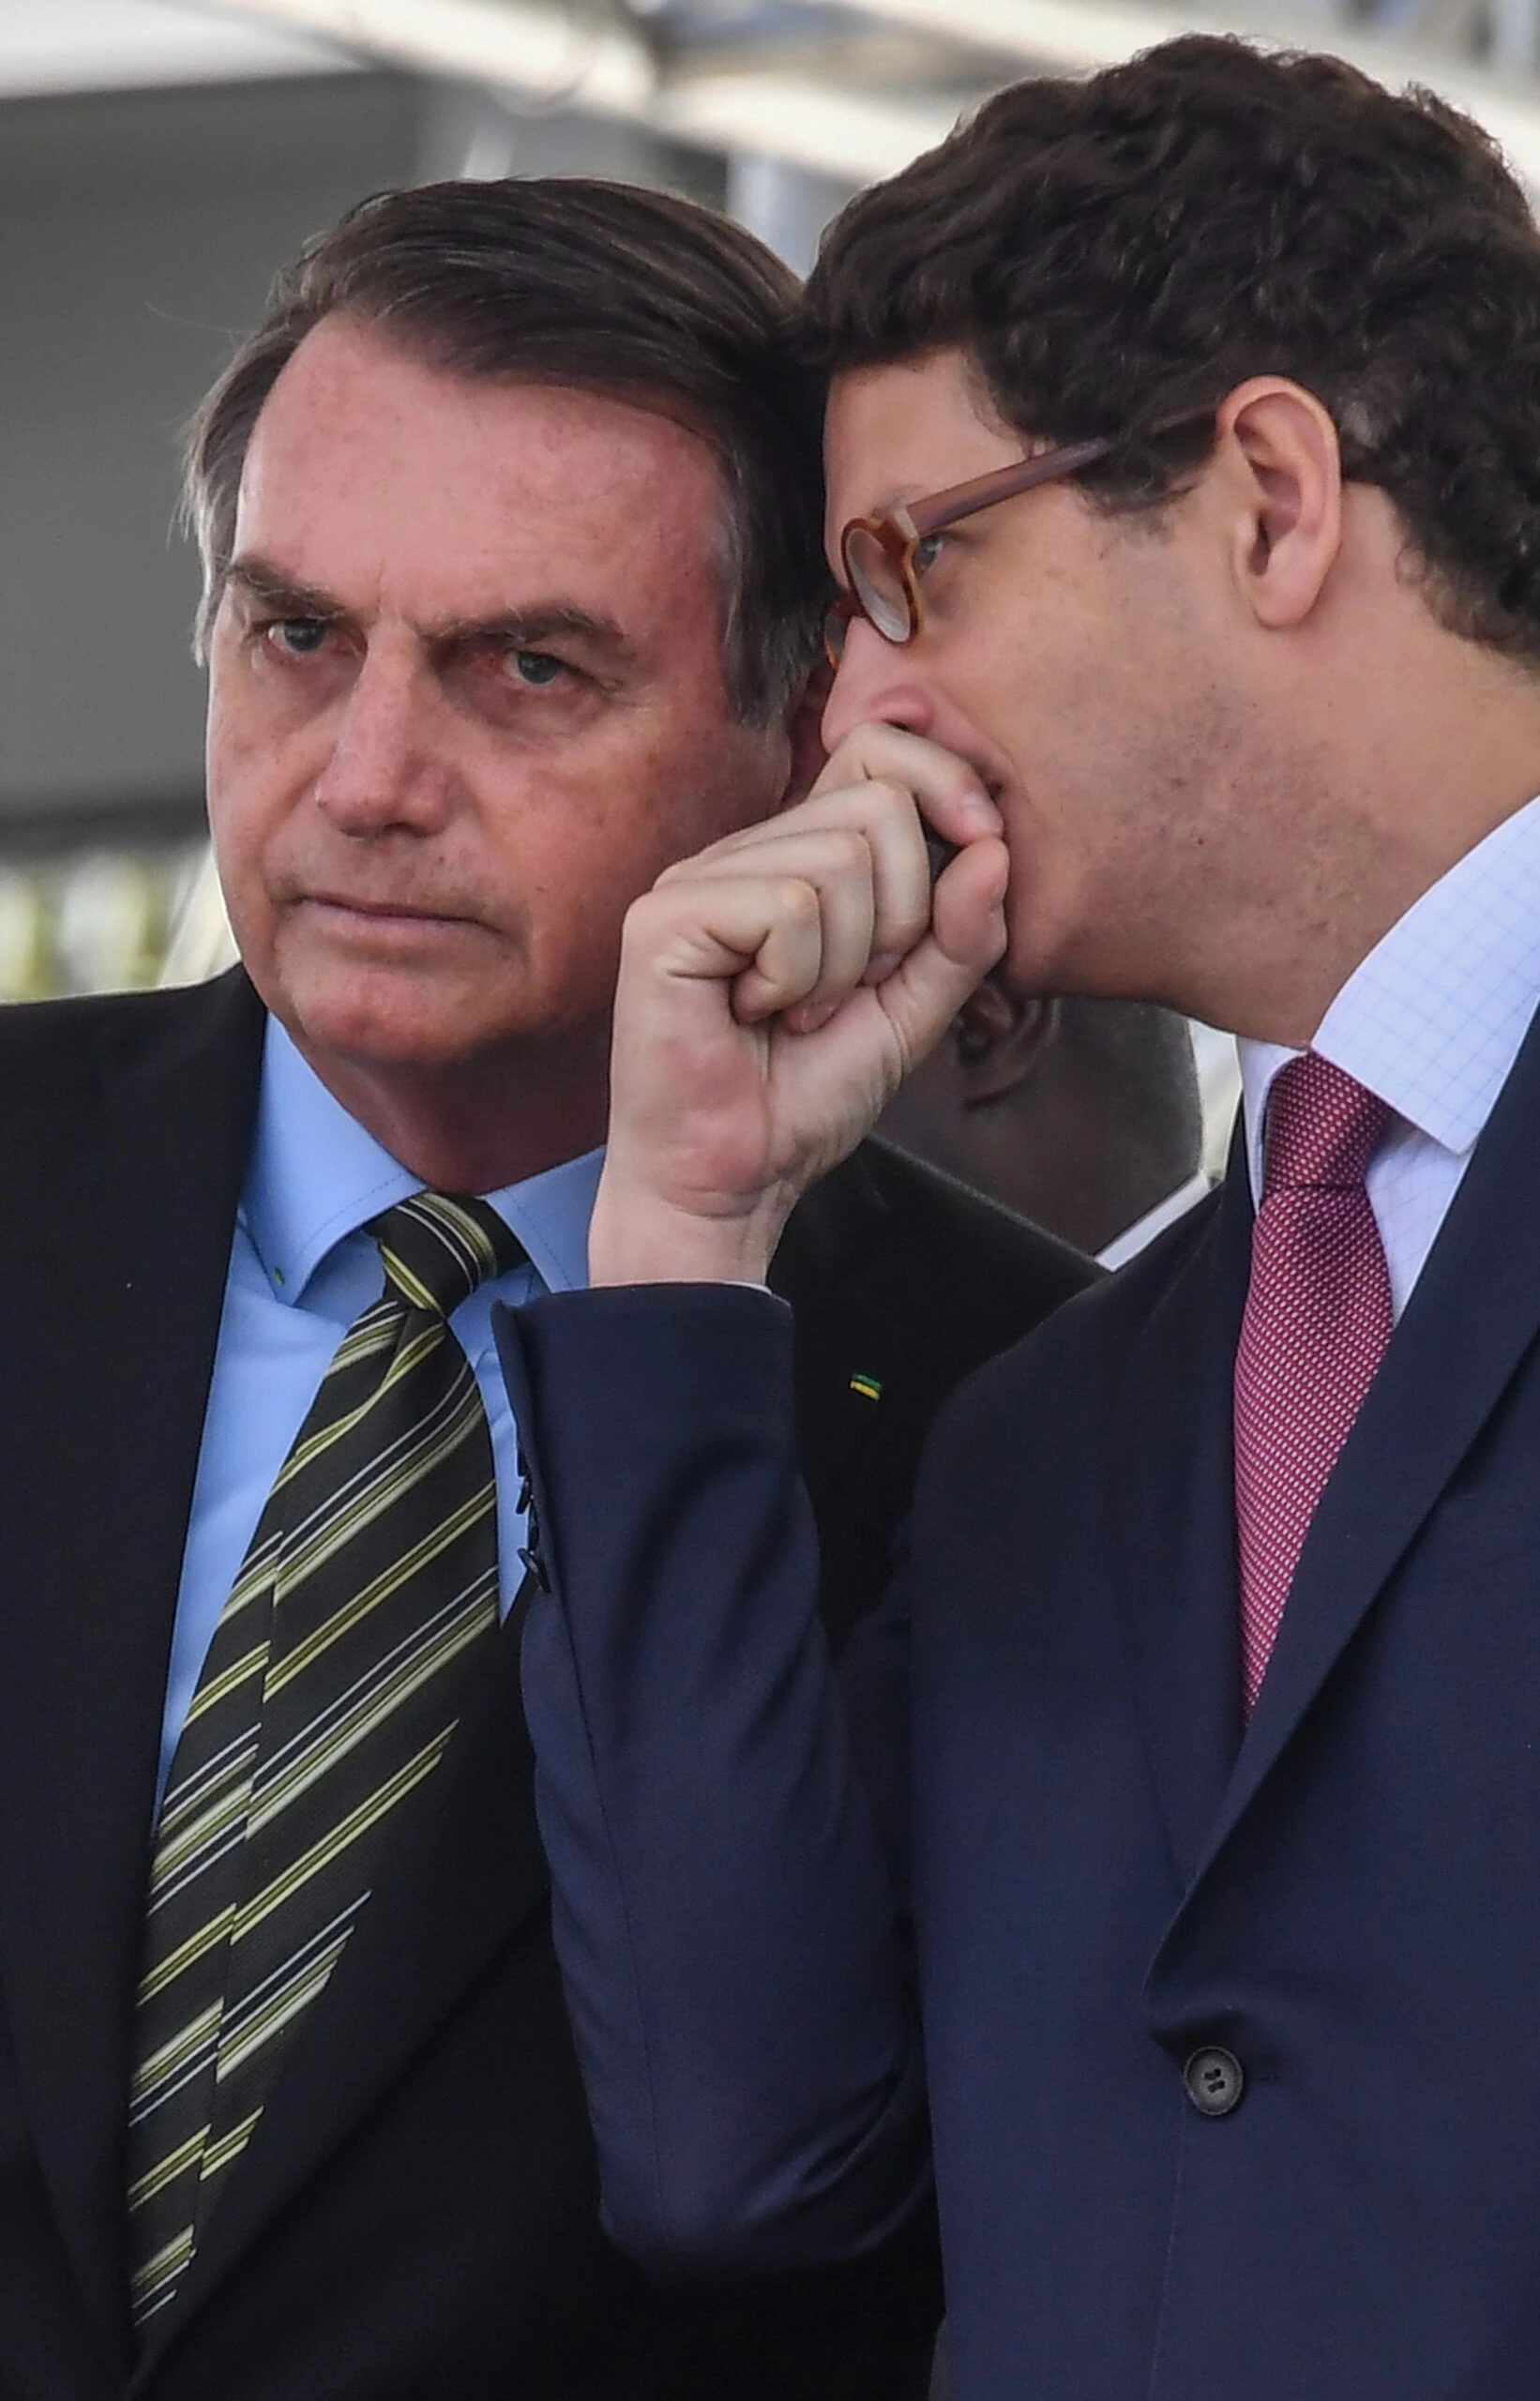 Brazilian President Jair Bolsonaro (L) listens to his Minister of the Environment Ricardo Salles, during a military event in Sao Paulo, Brazil on October 11, 2019.